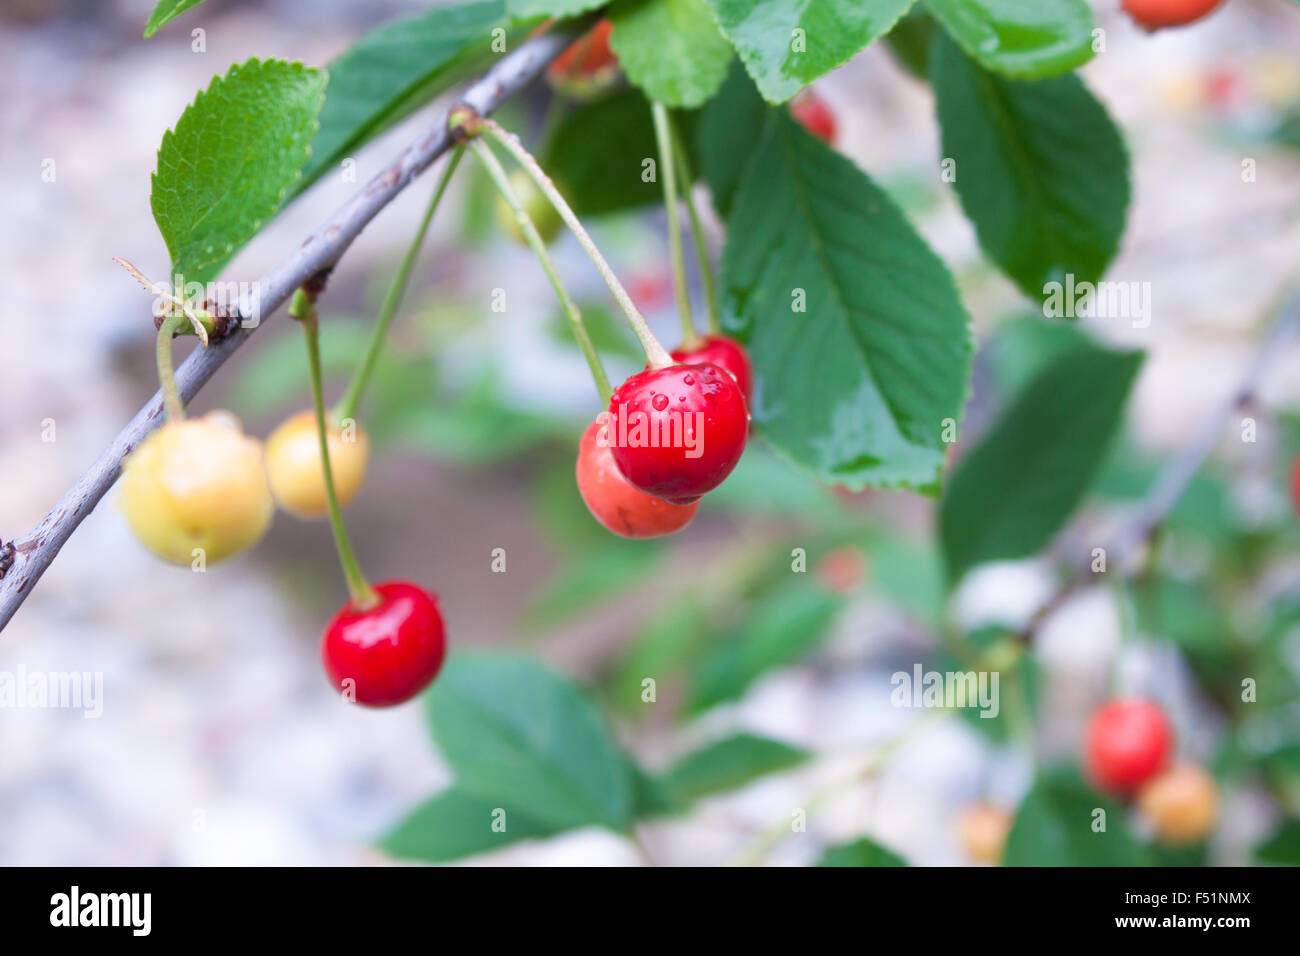 Red sour cherry, prunus cerasus, on a cherry plant Stock Photo